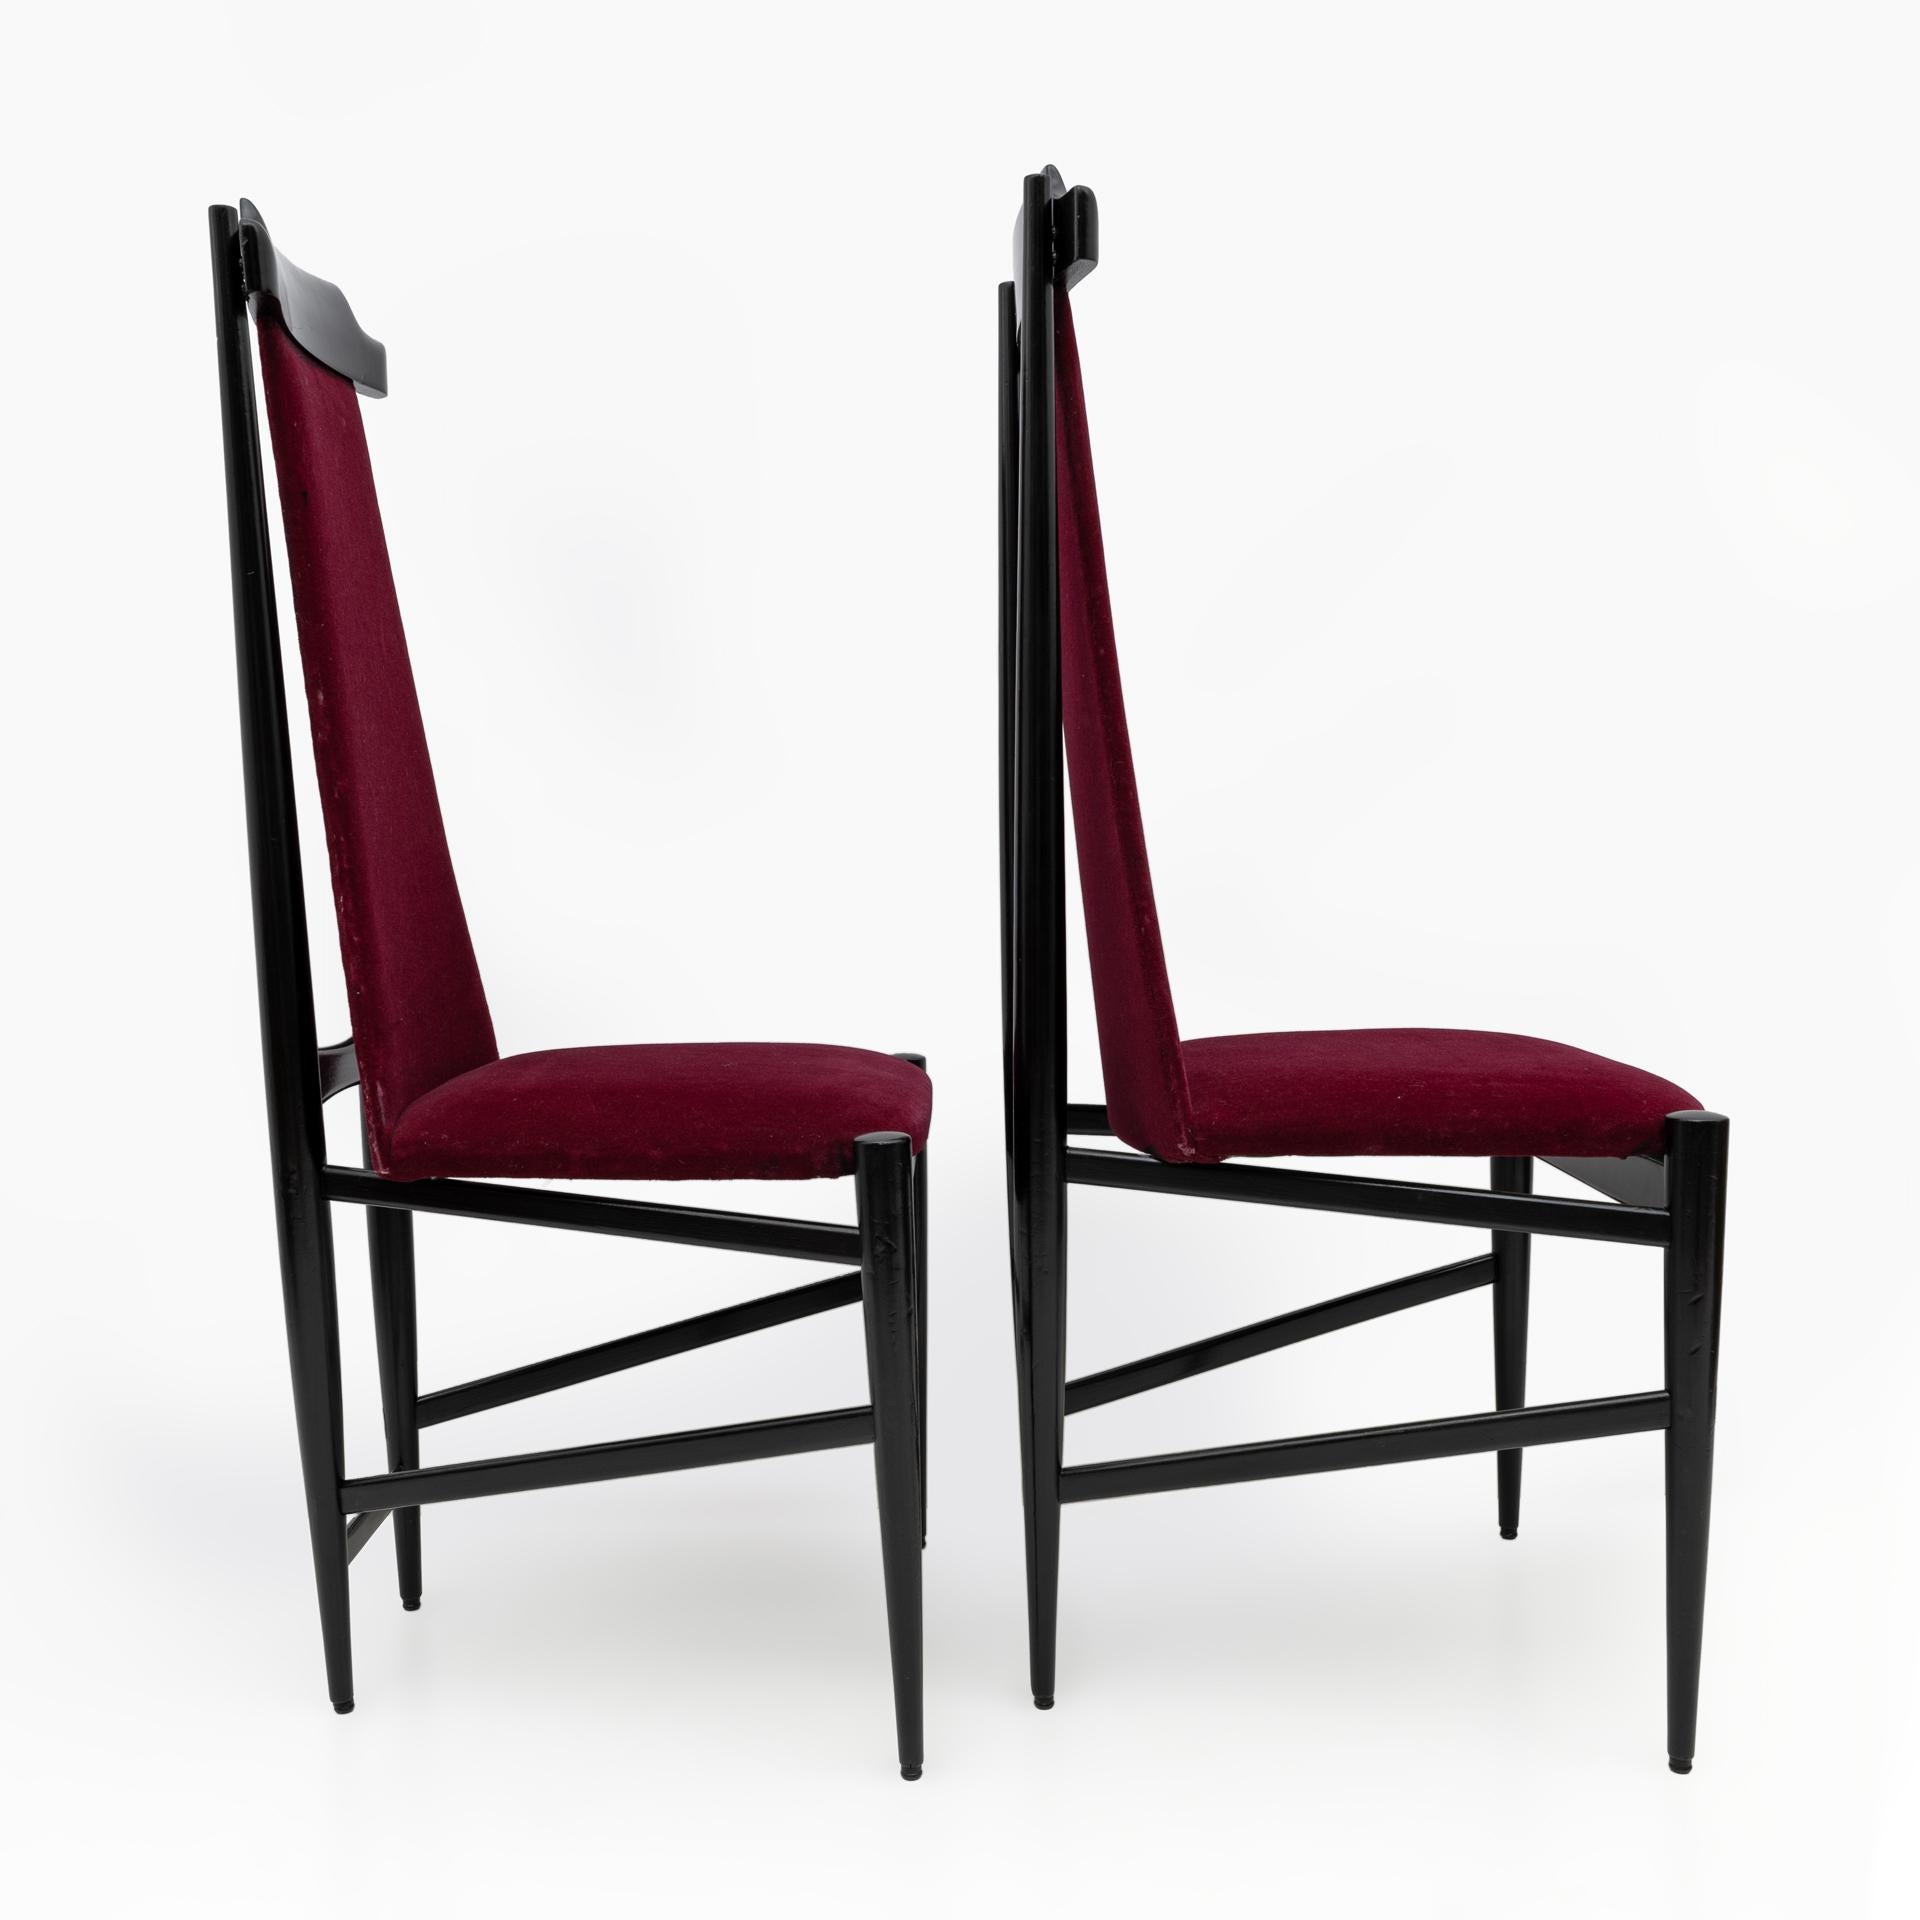 Ebonized Sergio Rodrigues Mid-century Modern Brazil Chairs, 1960s For Sale